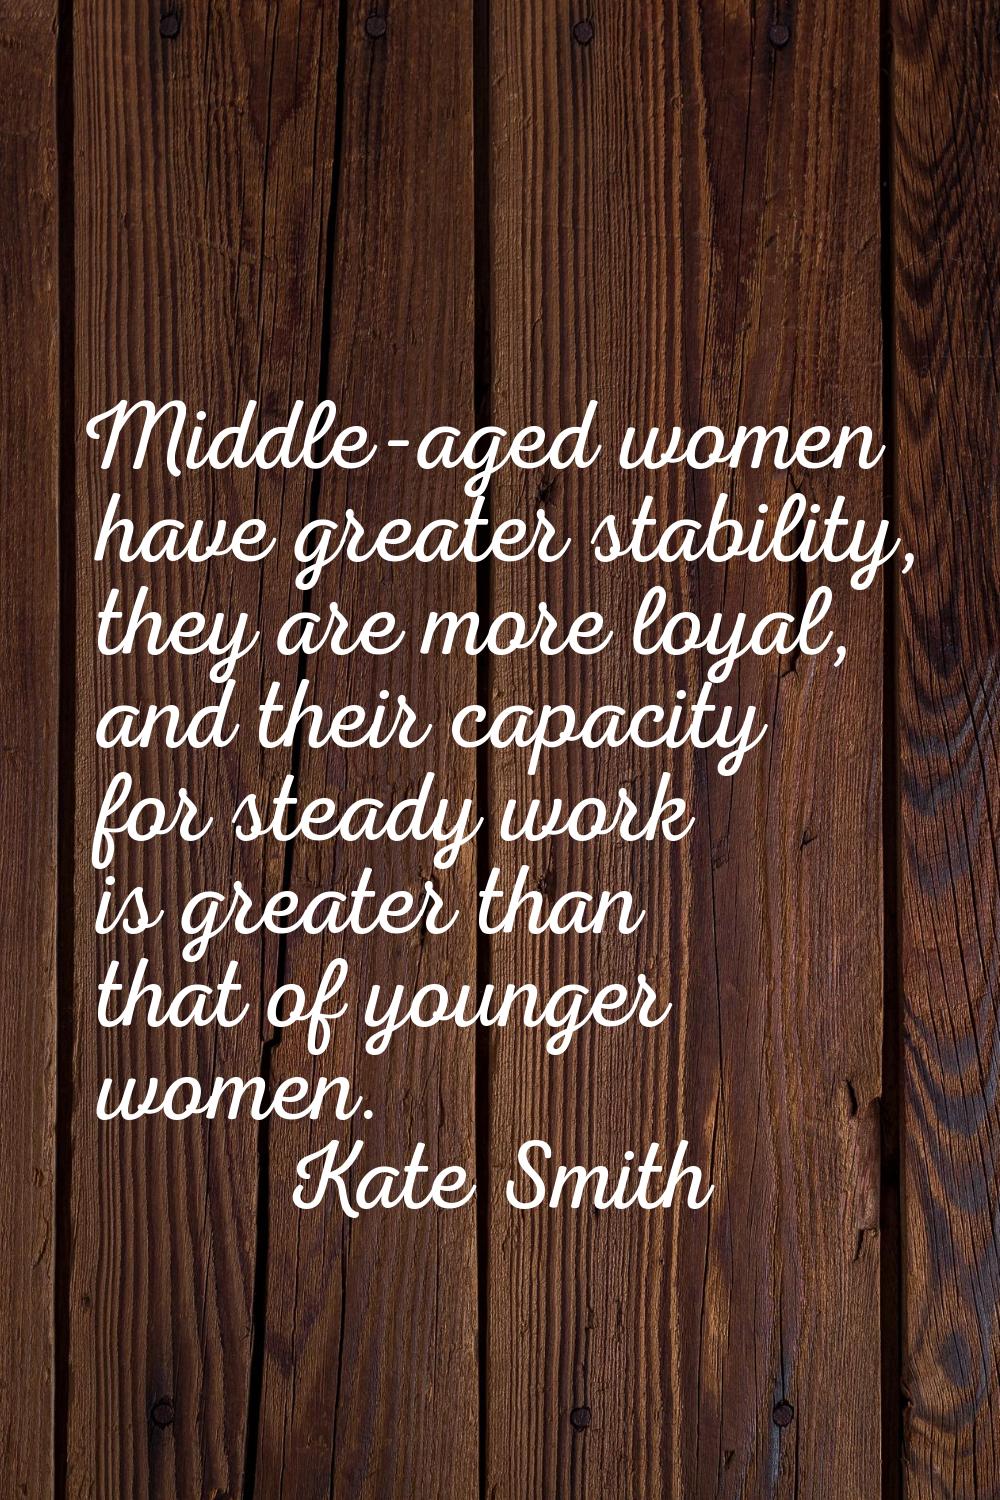 Middle-aged women have greater stability, they are more loyal, and their capacity for steady work i